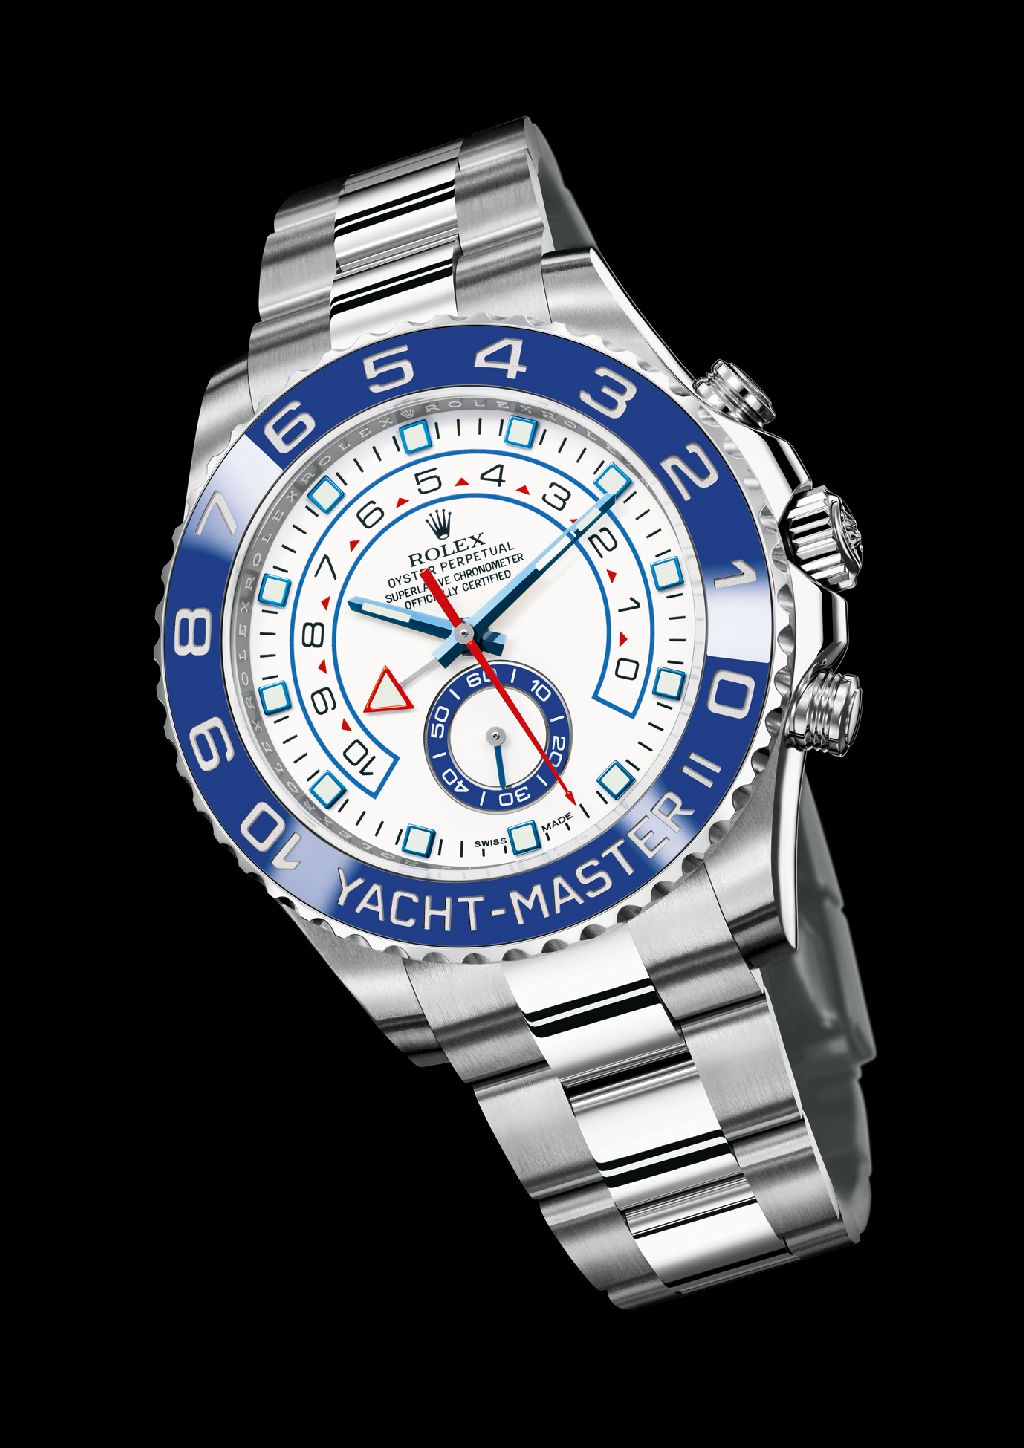 ROLEX OYSTER PERPETUAL YACHT-MASTER II